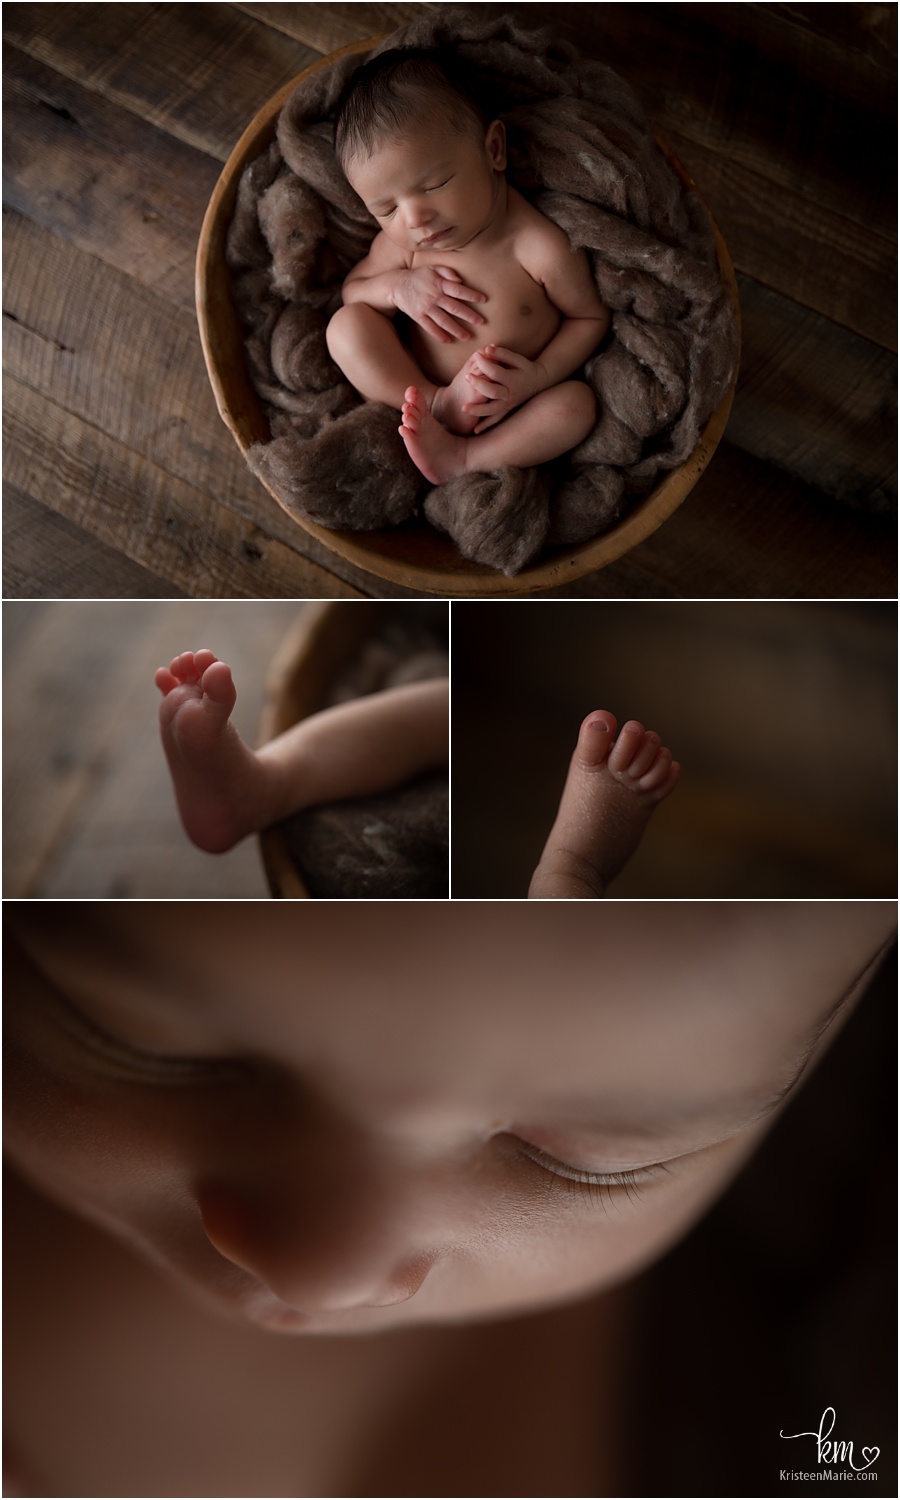 newborn baby features and baby in a bowl